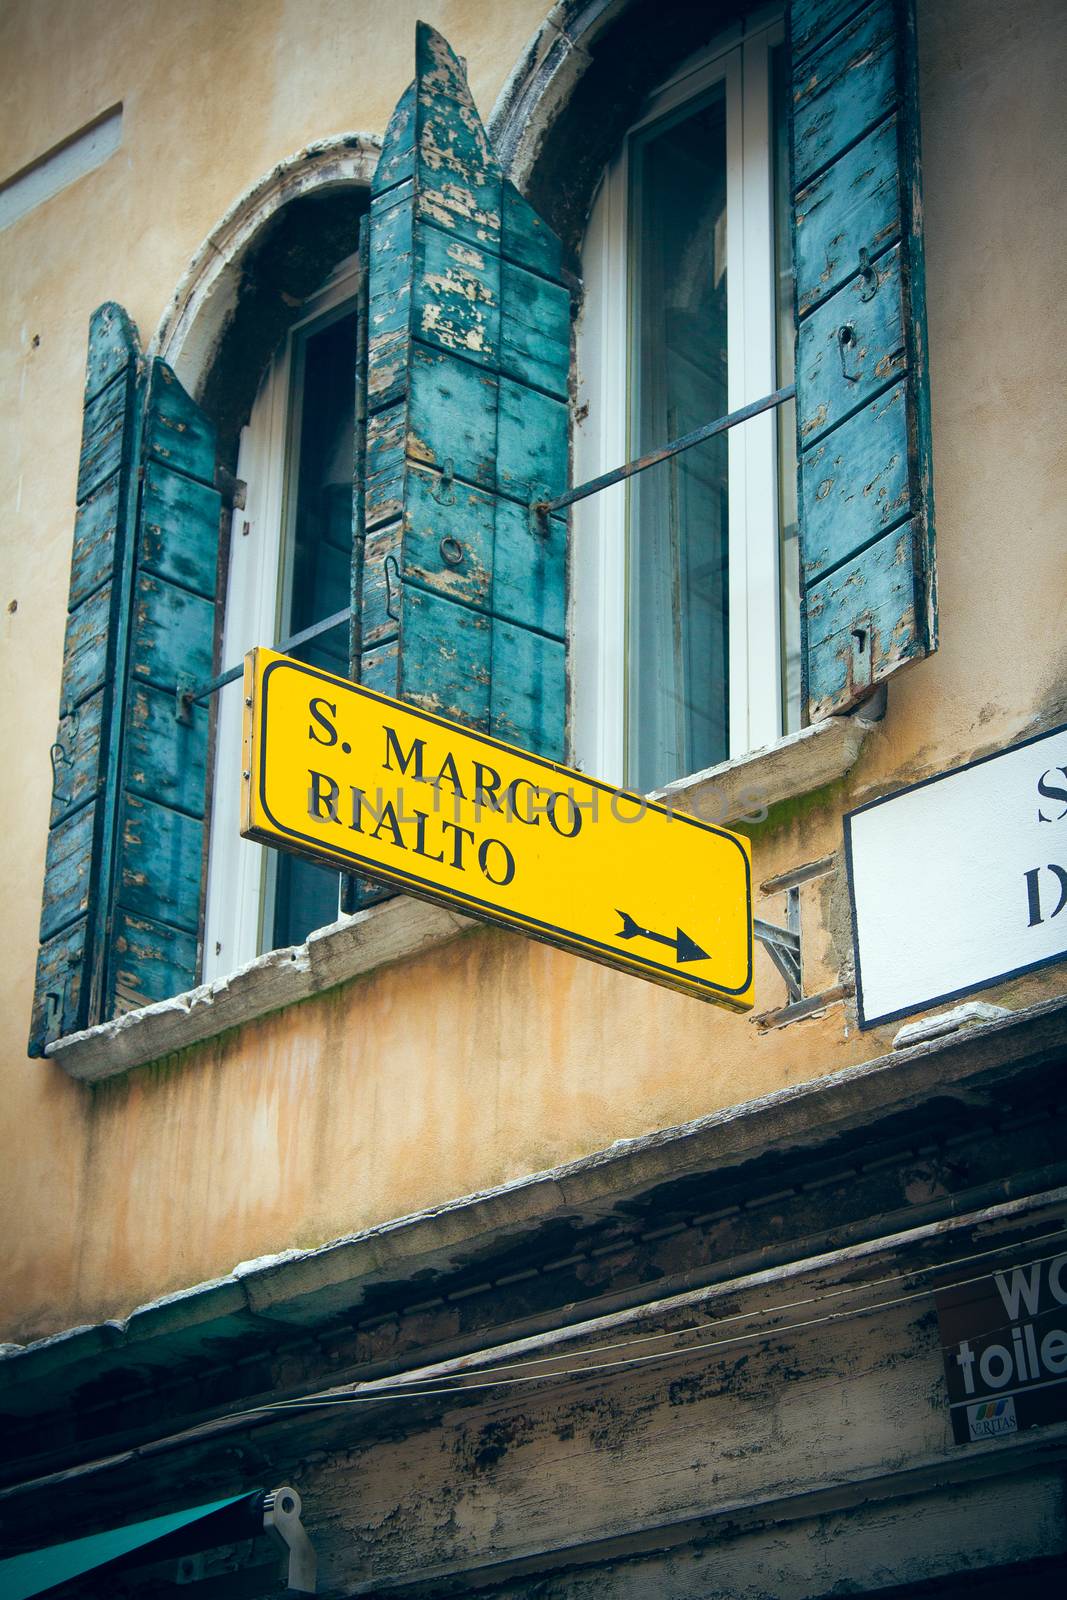 Directional sign in Venice